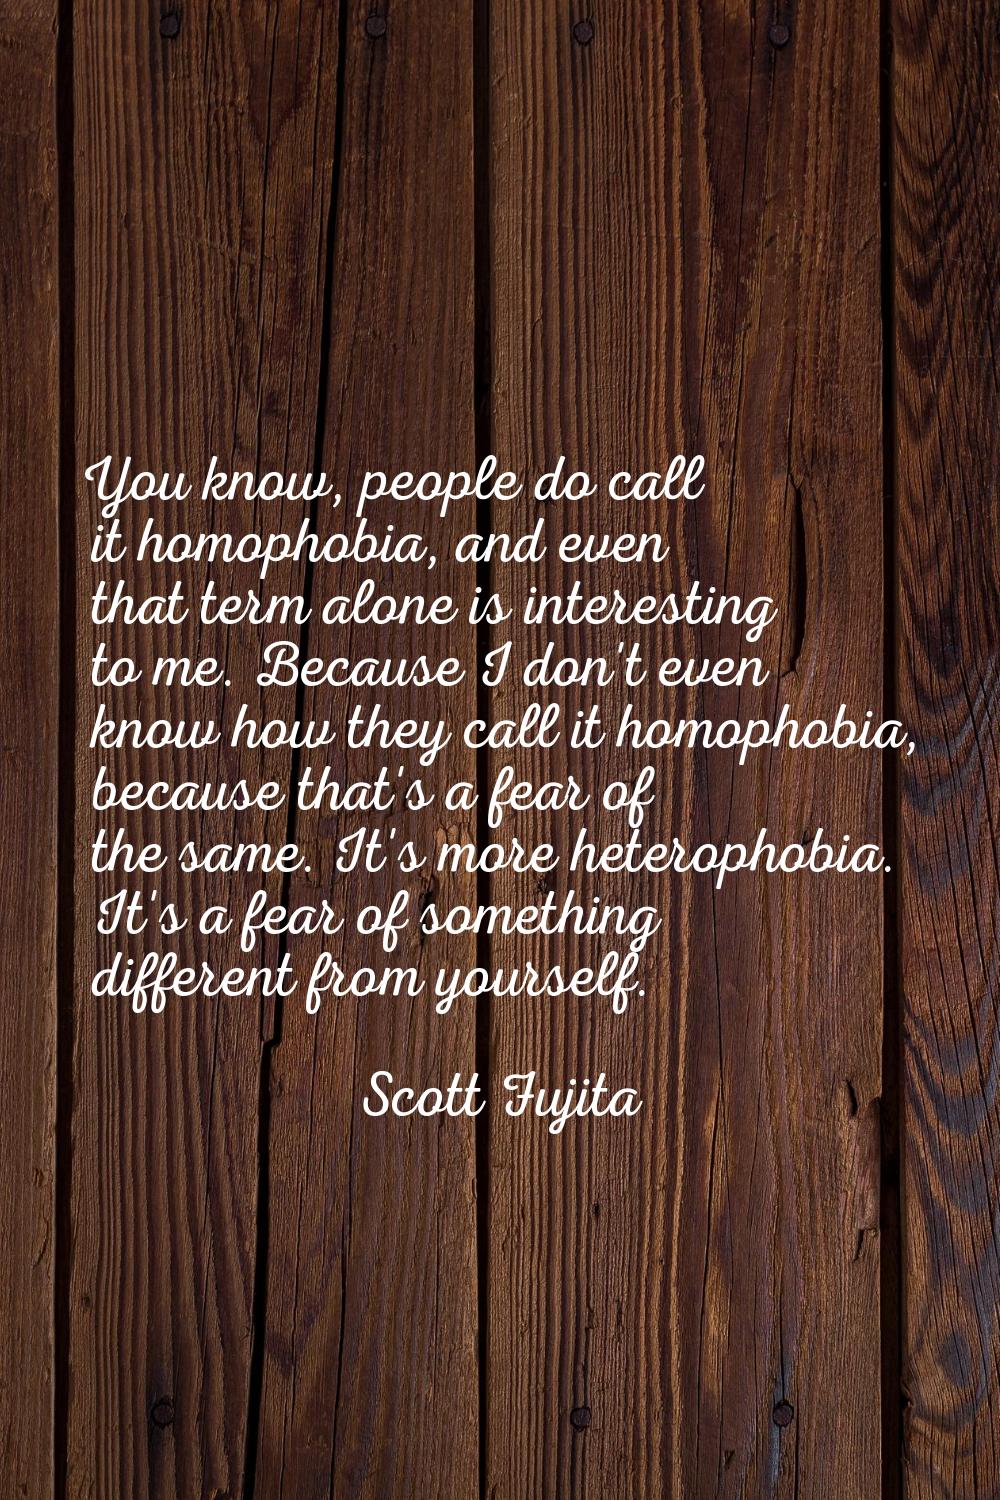 You know, people do call it homophobia, and even that term alone is interesting to me. Because I do